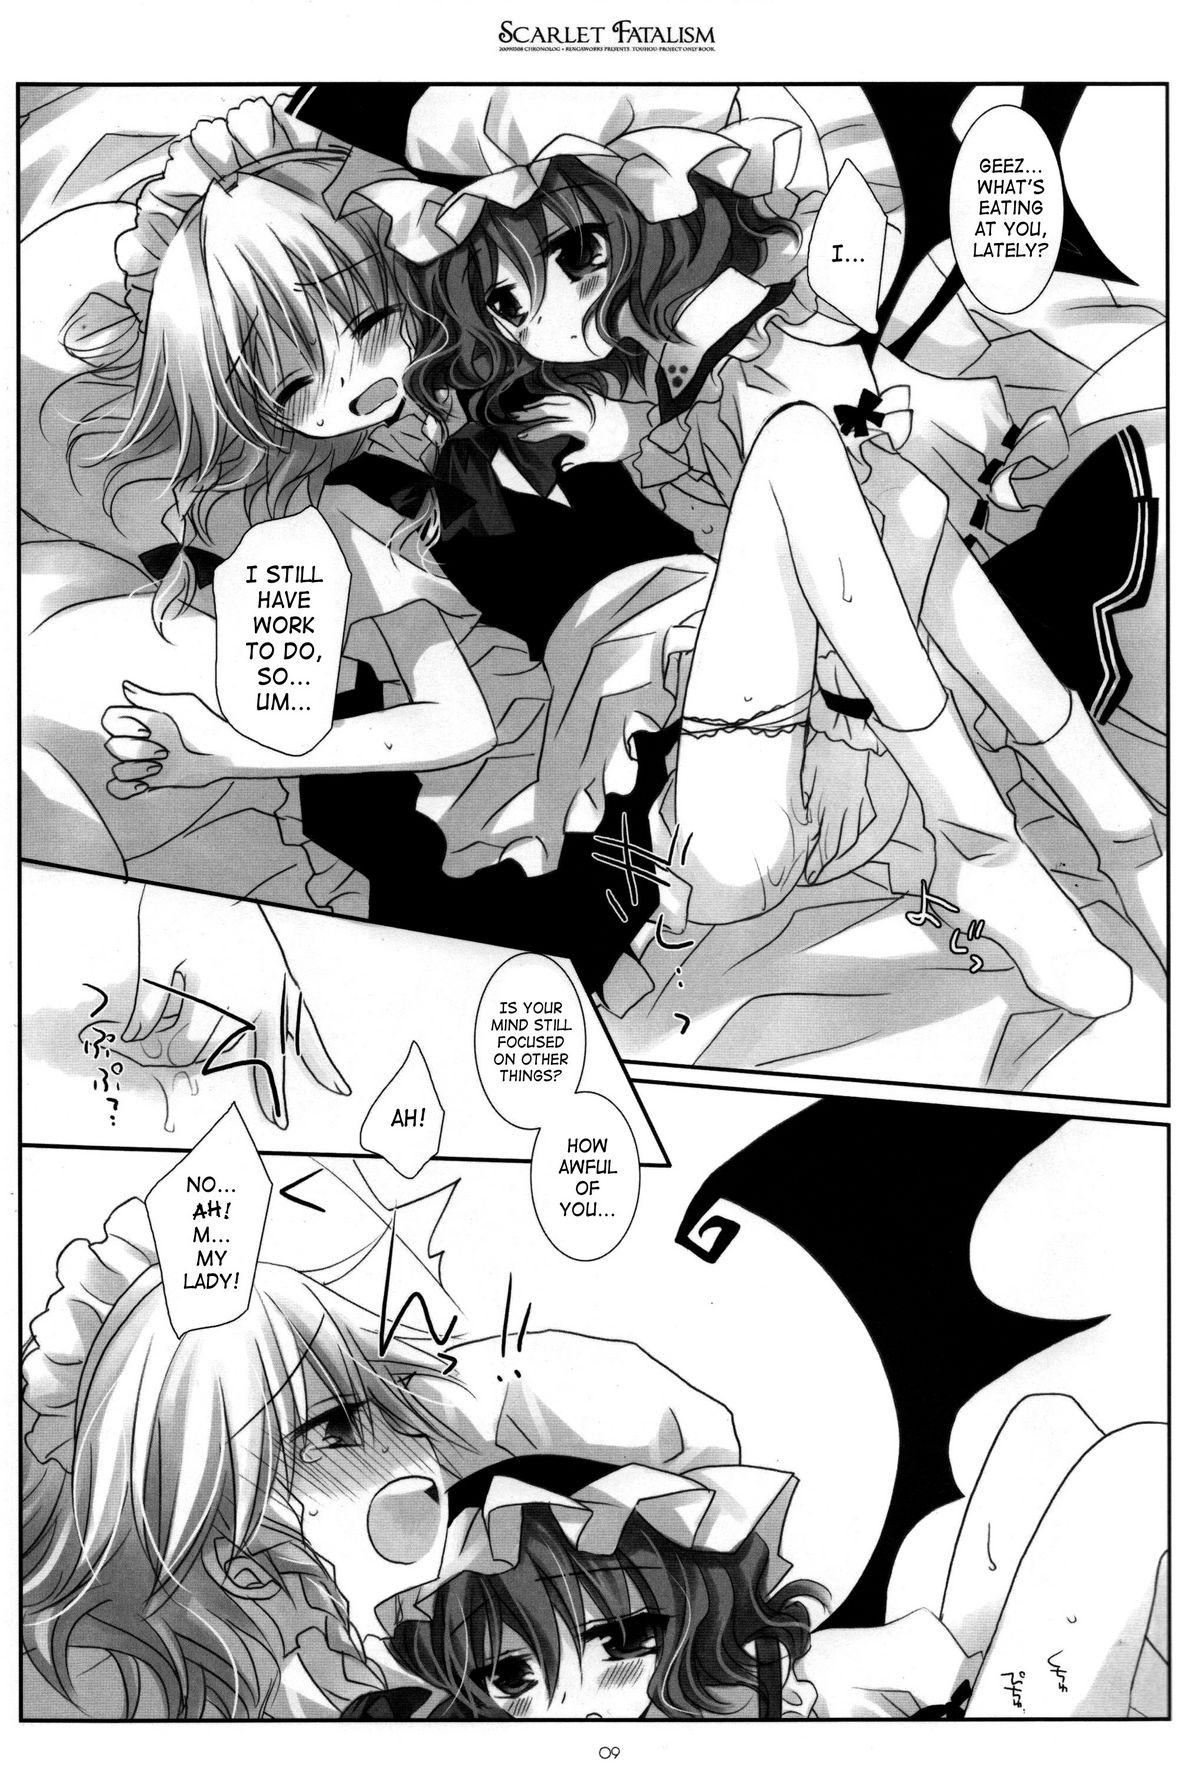 Rope Scarlet Fatalism - Touhou project Nice Tits - Page 8